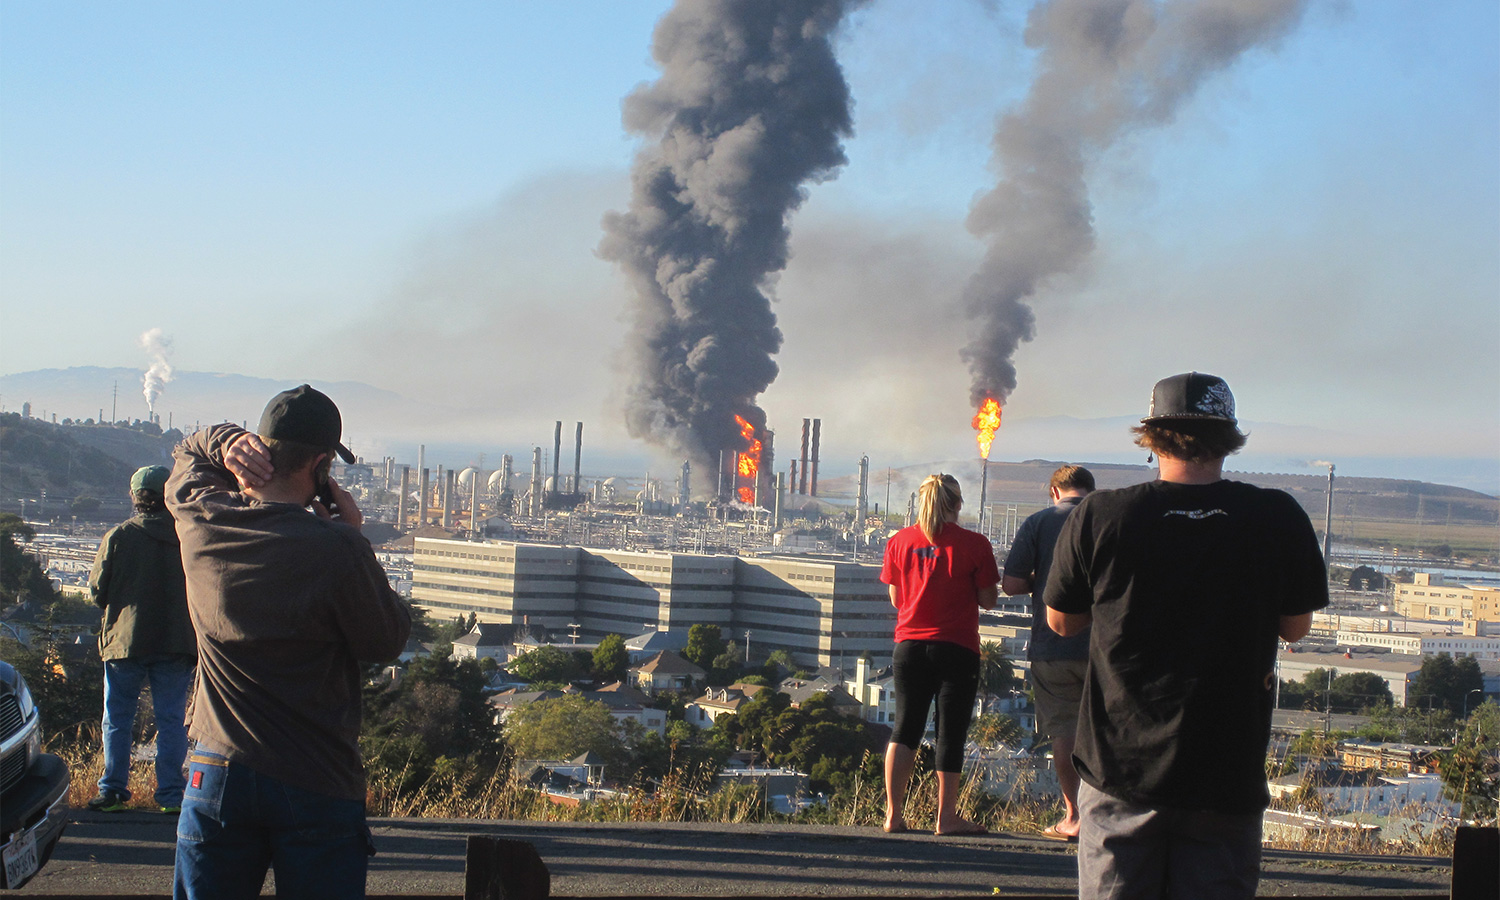 Onlookers view a refinery fire from a distance as black plumes fill the air.